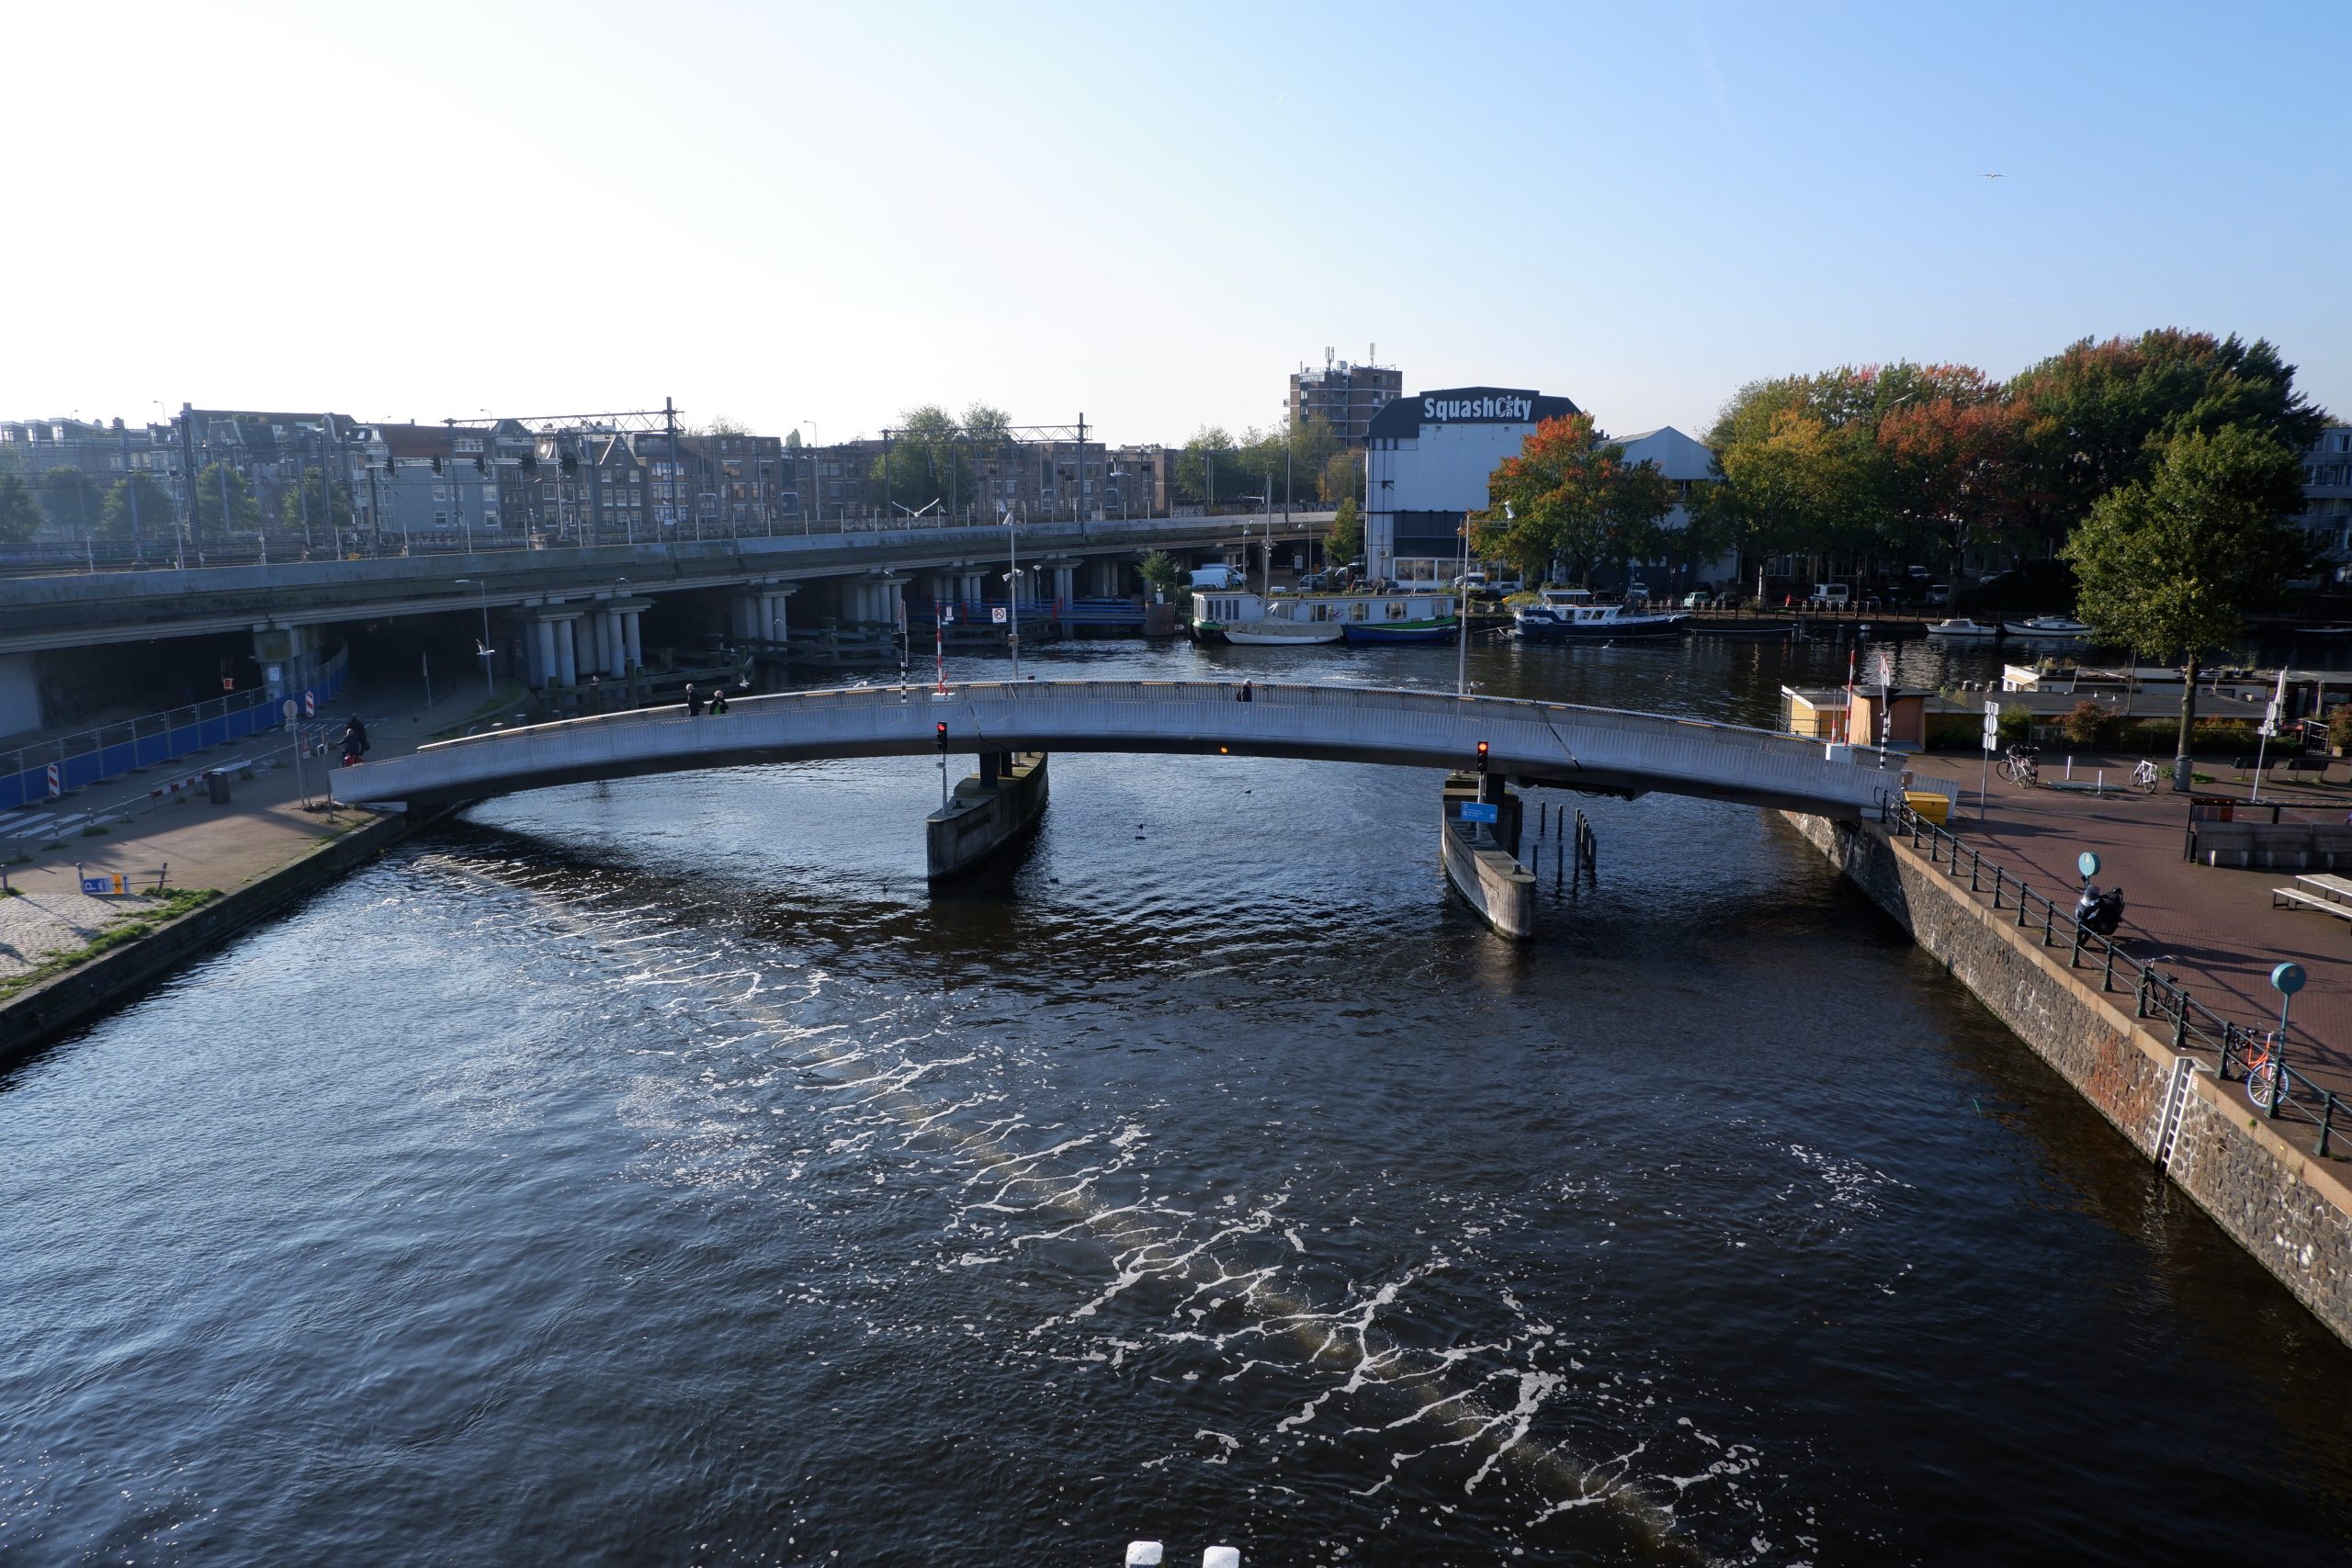 Bubble Barrier technology implemented in Amsterdam to capture plastic pollution from canals